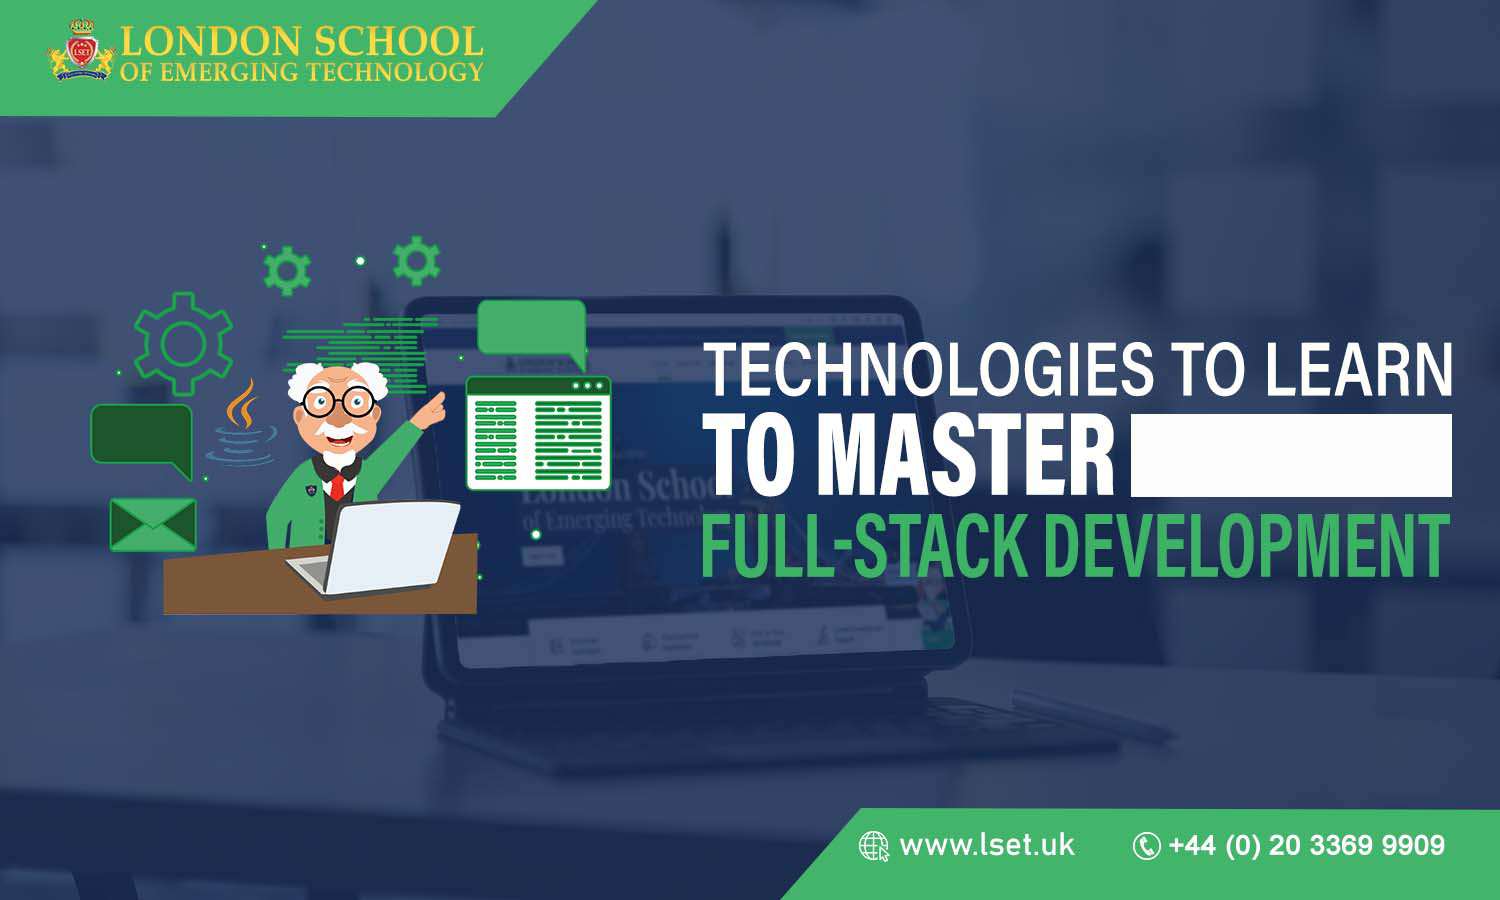 Technologies to Learn to Master Full-Stack Development